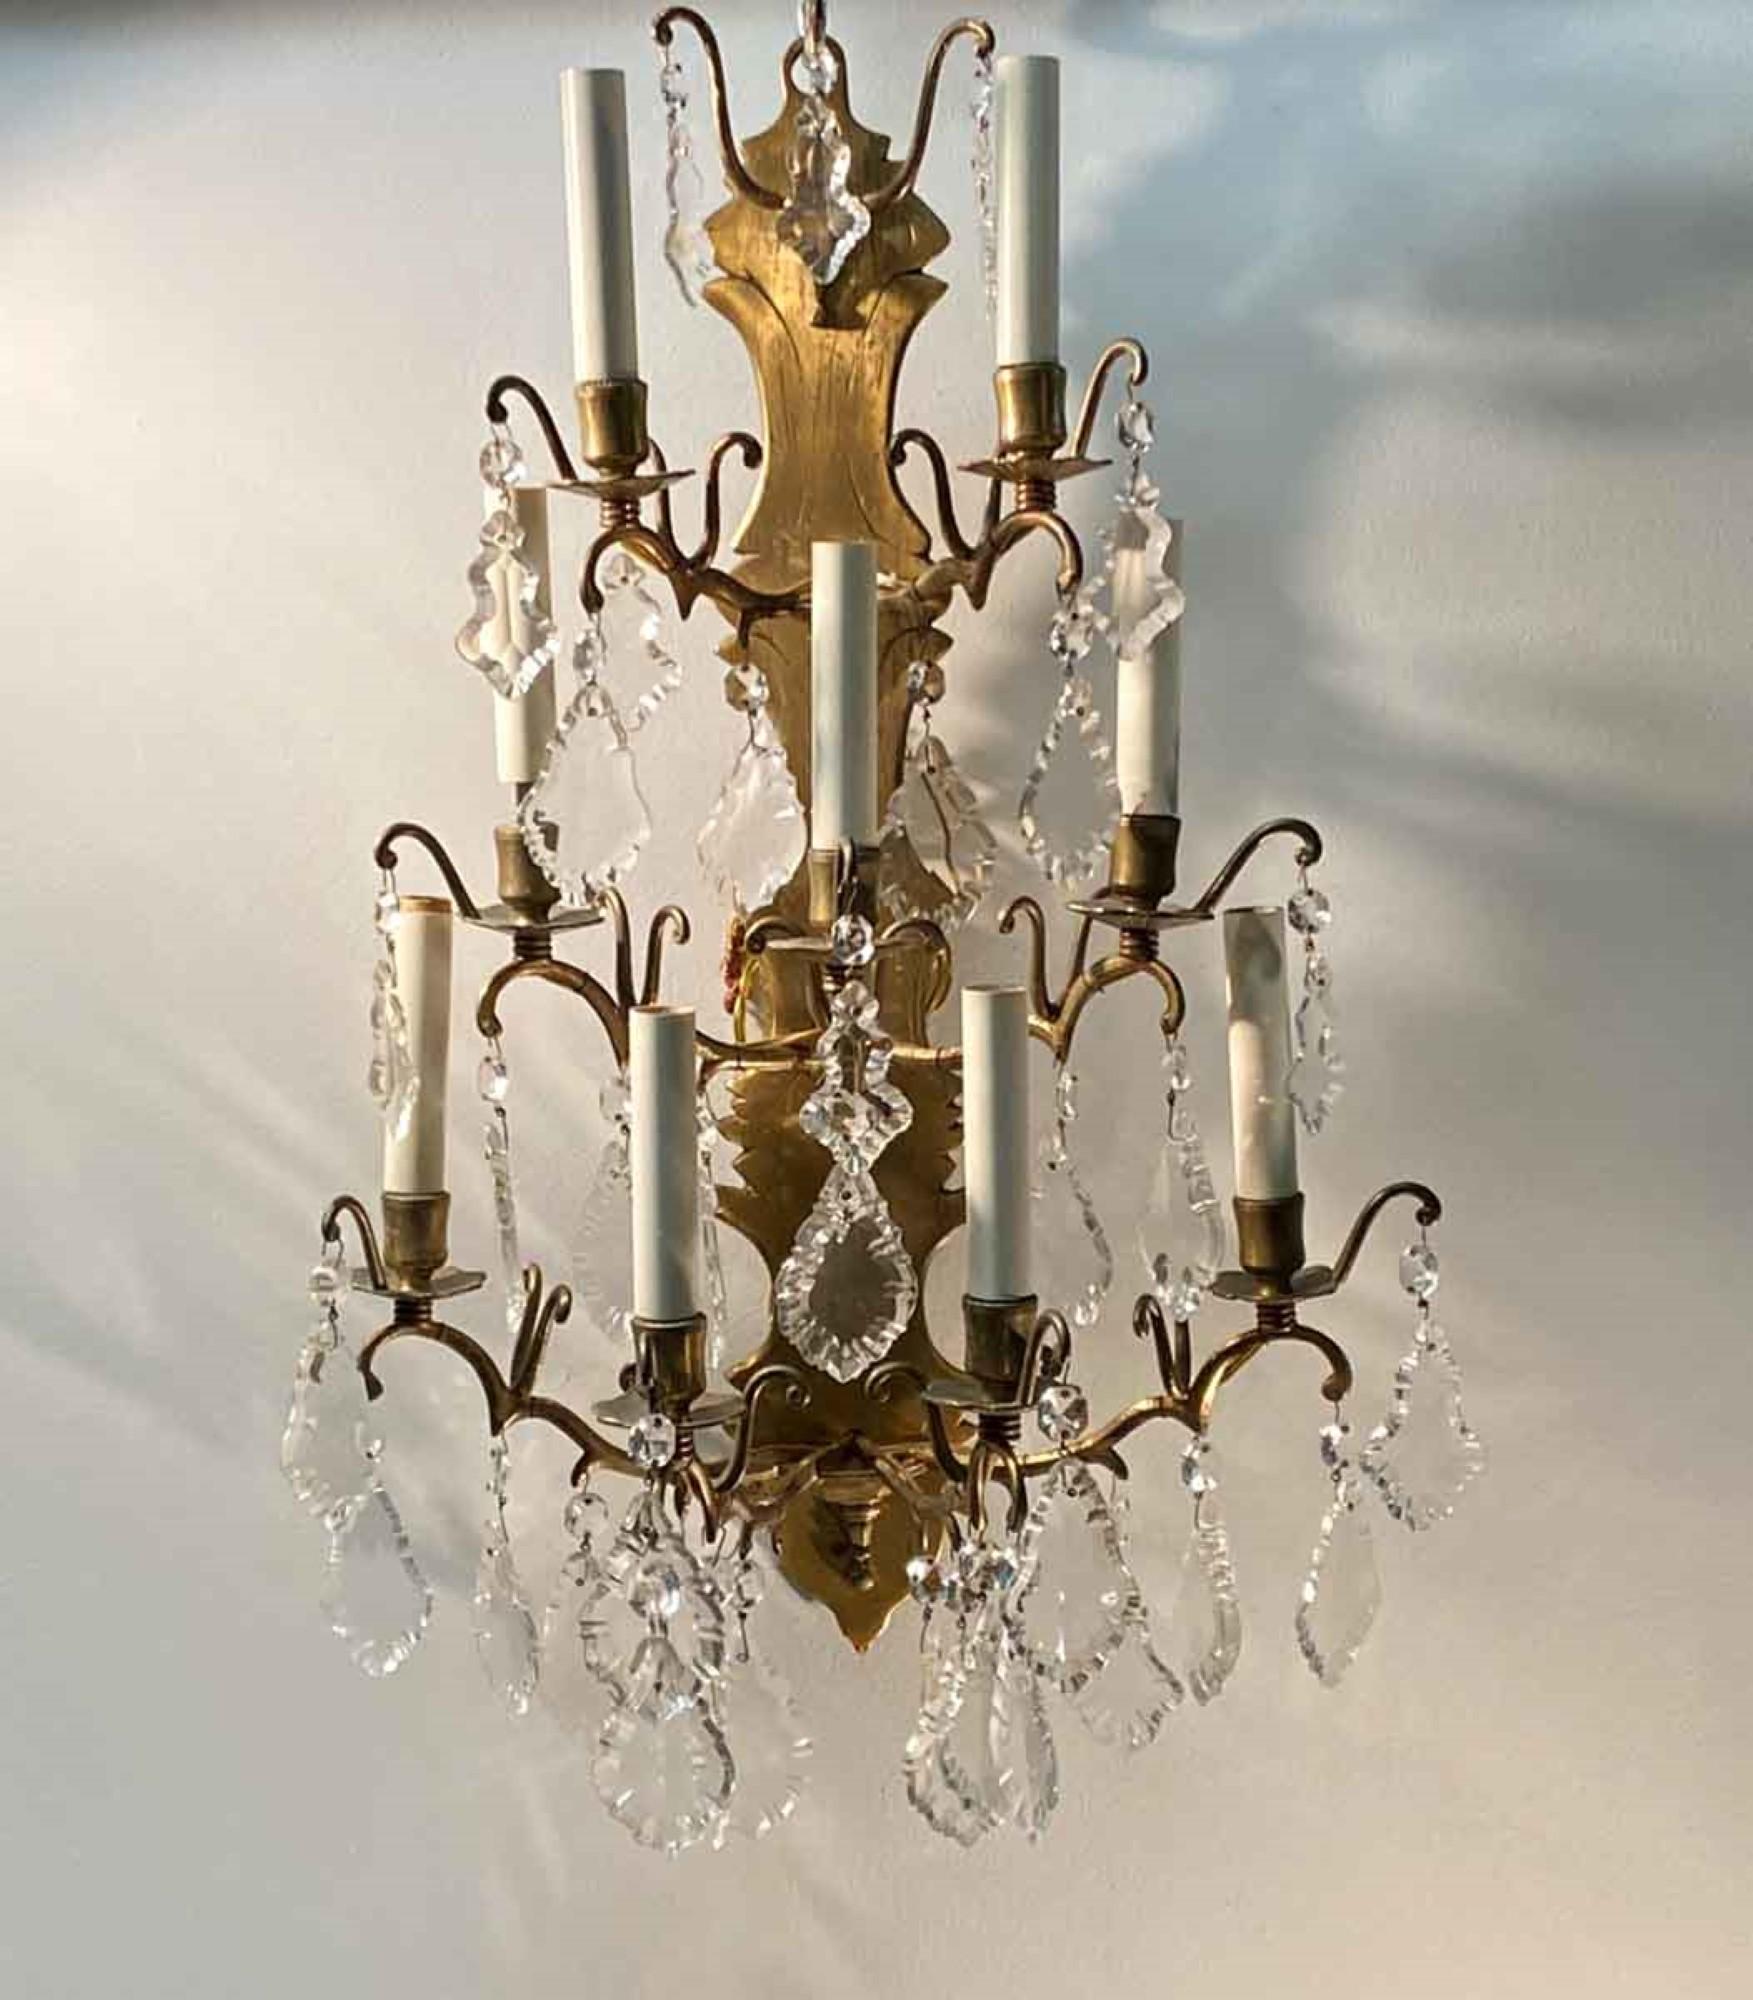 NY Plaza Hotel French Brass Crystal Sconce 9 Arms Quantity Available 2